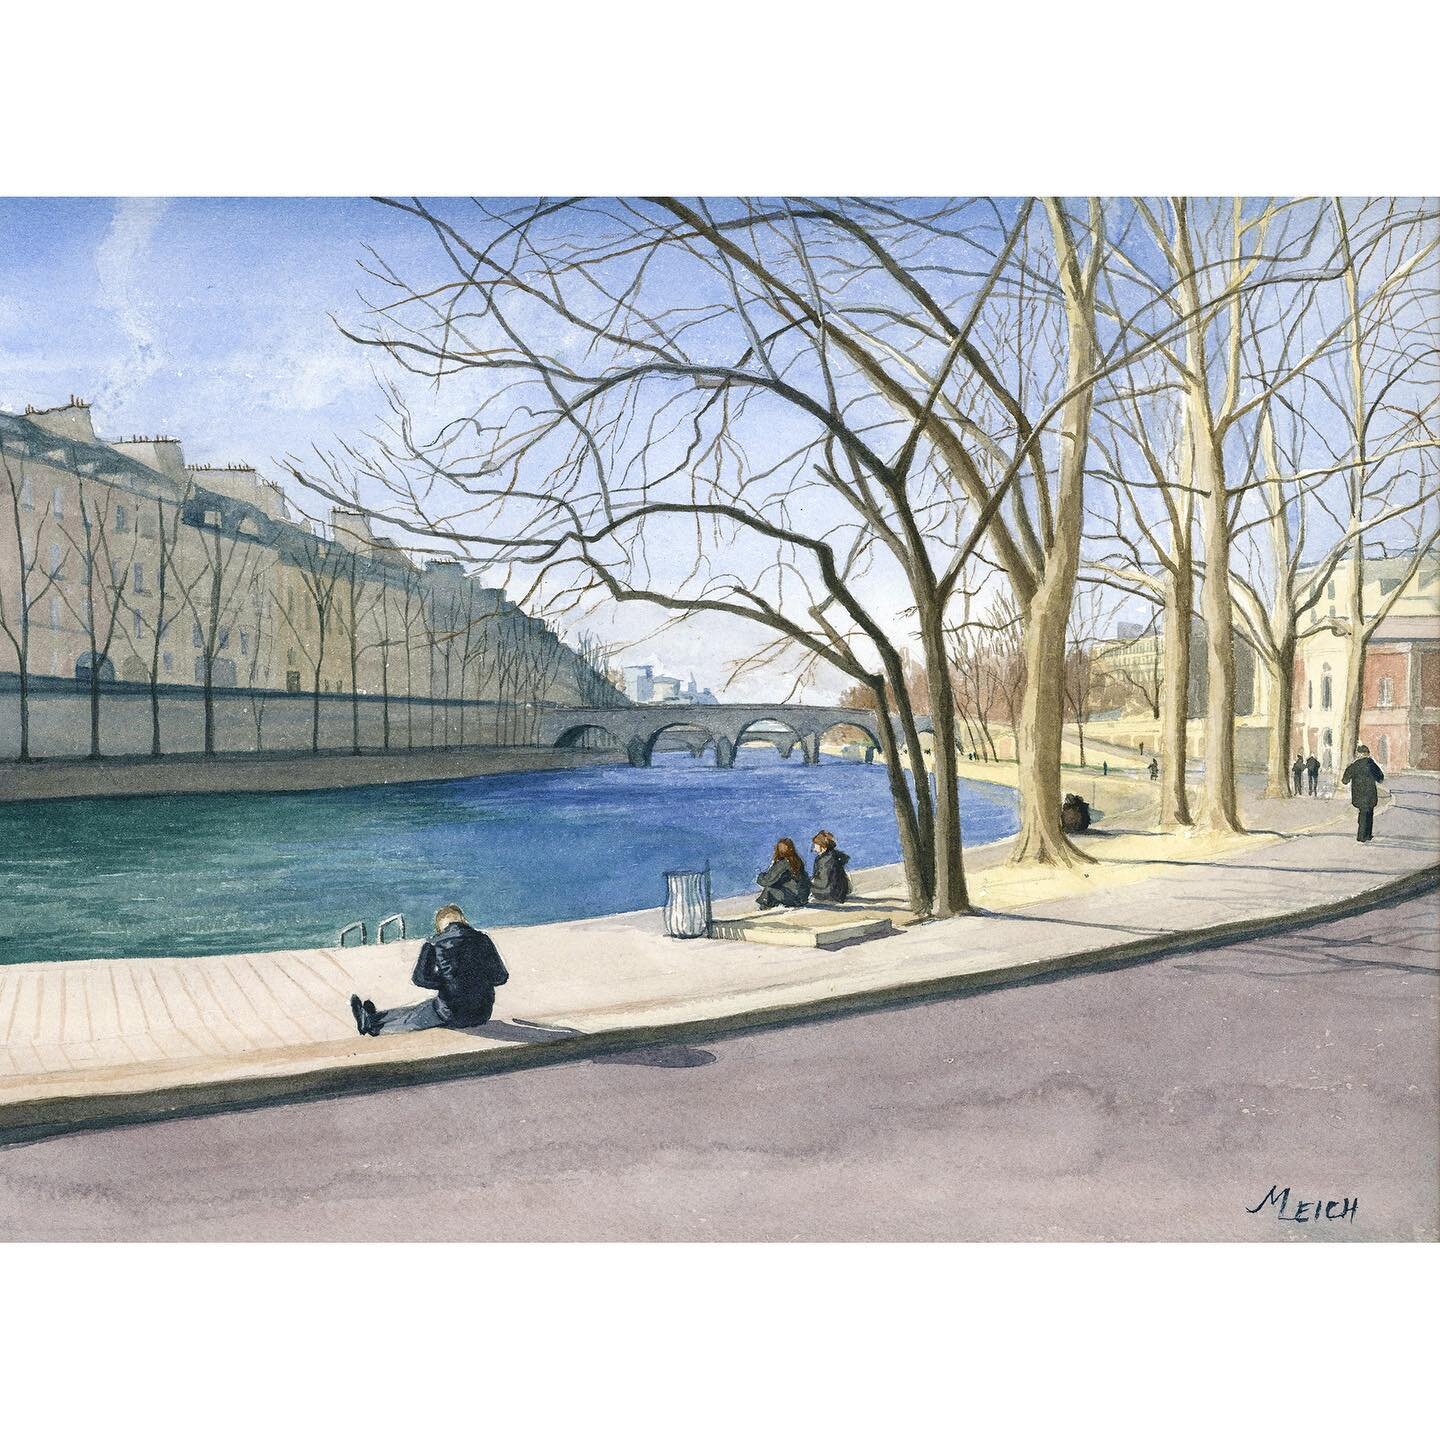 The Seine in March, 9 x 12&rdquo;, watercolor on paper - available! 

Catching up on posting Paris paintings - It was a joy and headache to paint all those little branches.

#parispainting #pariswatercolor #watercolorcityscape